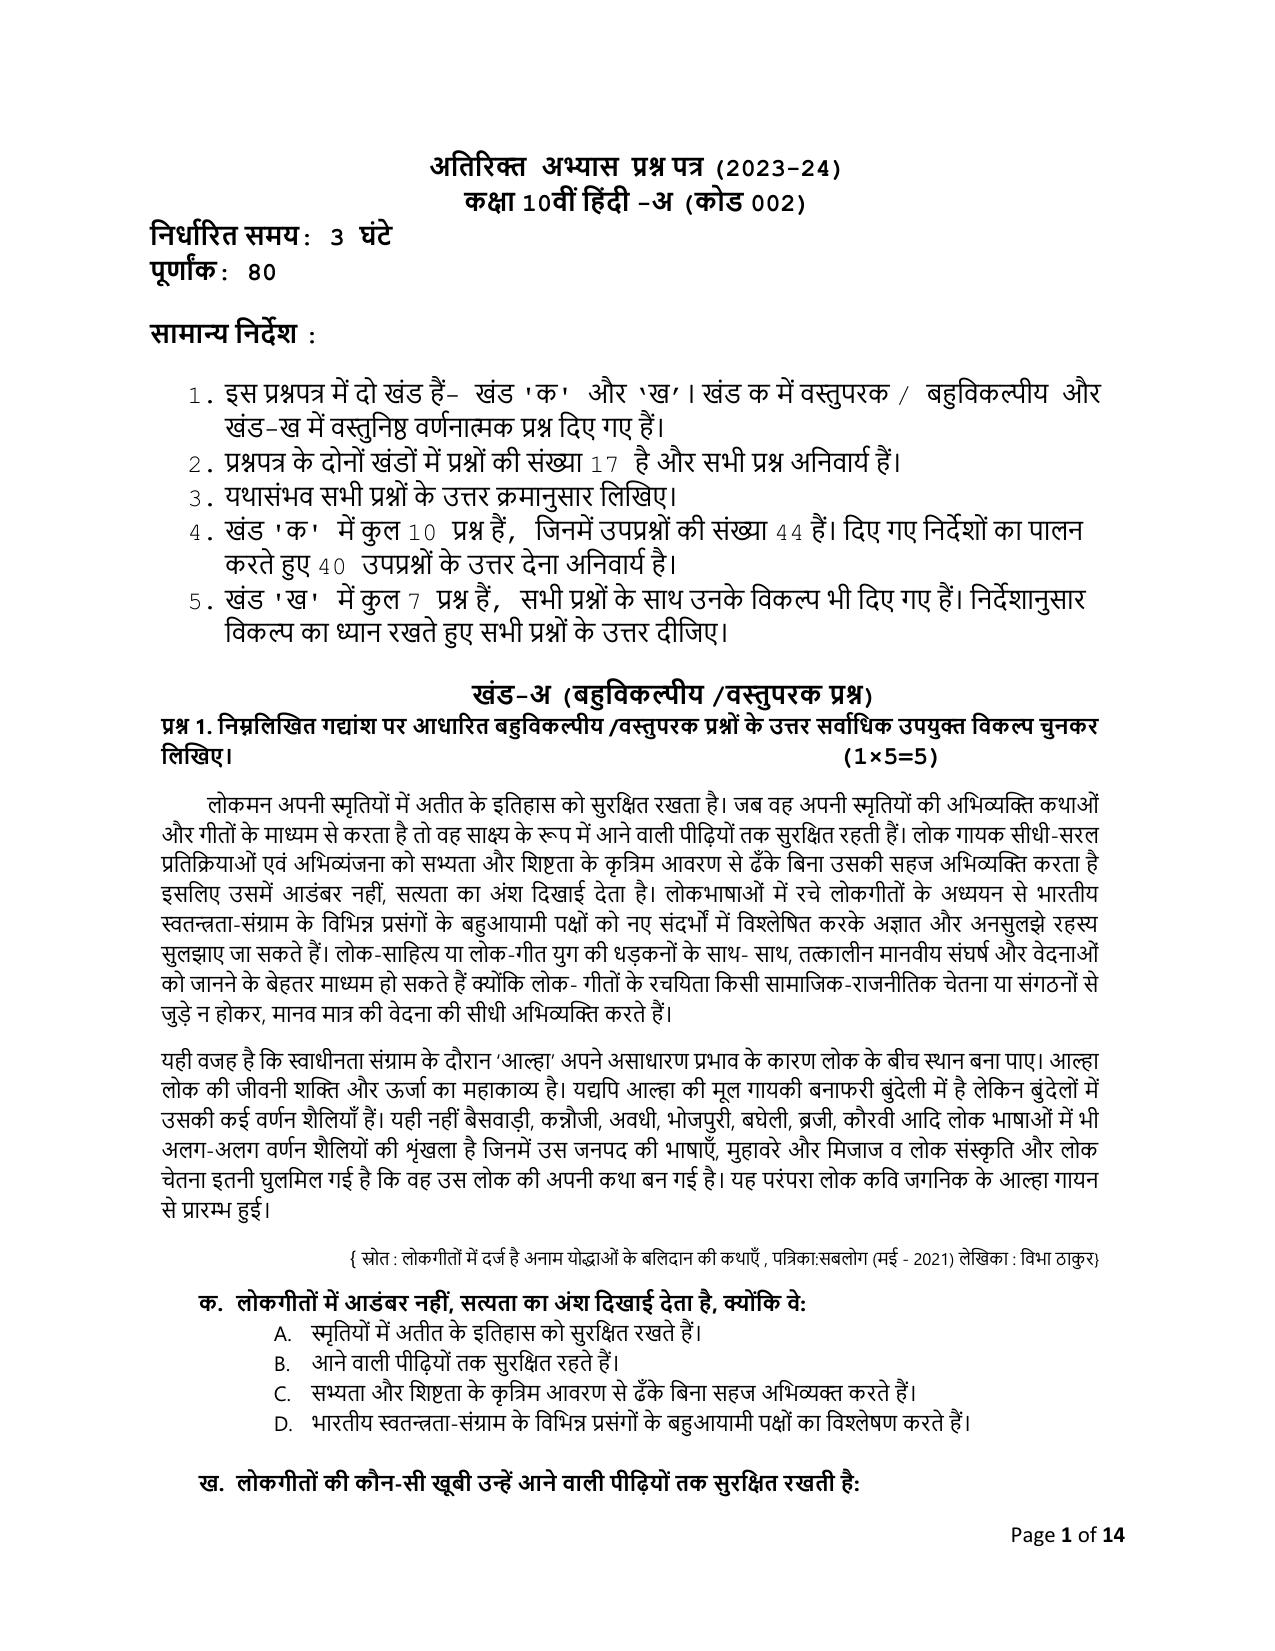 CBSE Class 10 Hindi A Set 2 Practice Questions 2023-24 - Page 1